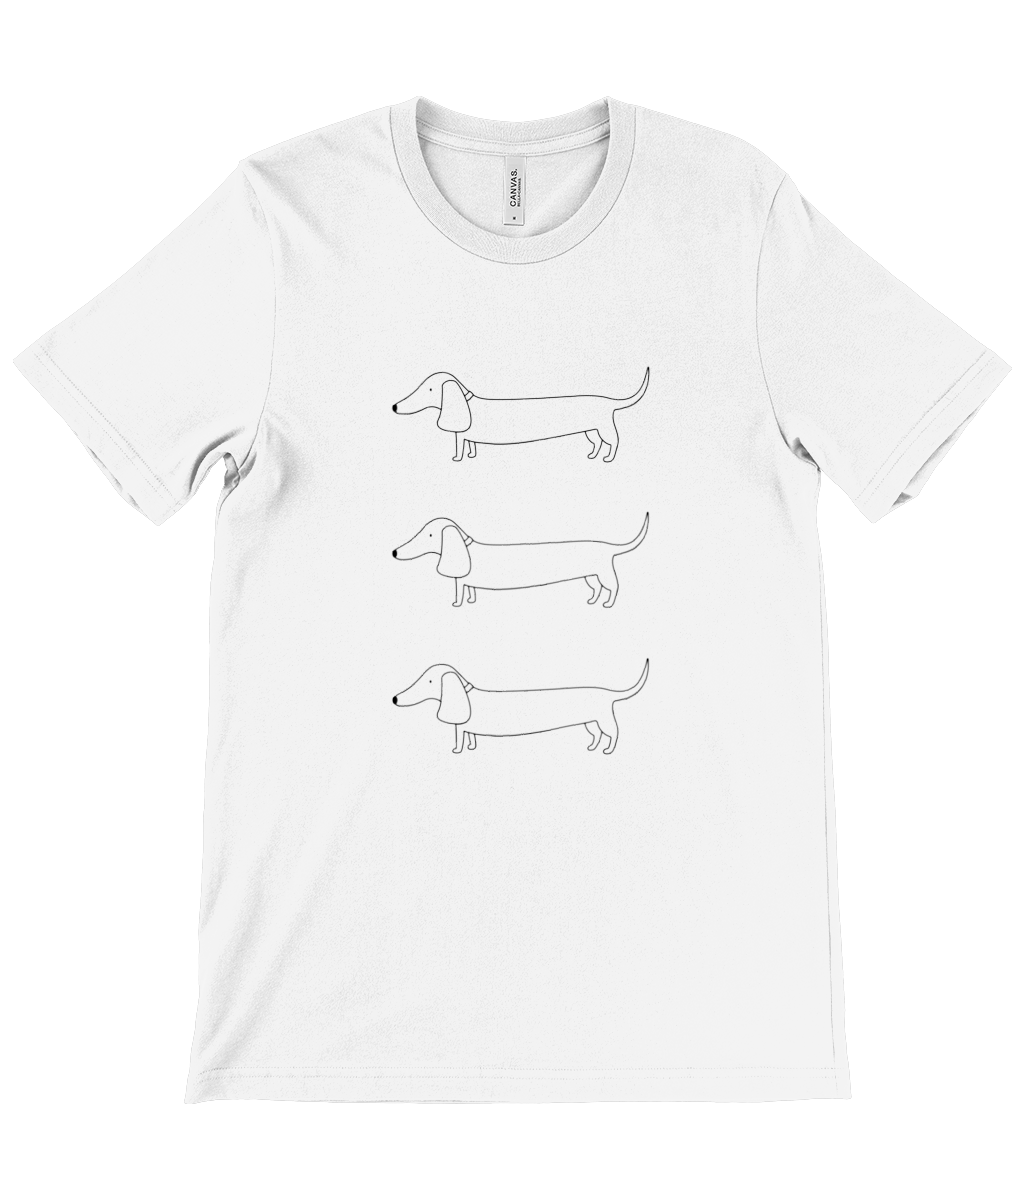 White unisex t-shirt. Design on front shows 3 outline drawings of sausage dogs, in a column one above the other.